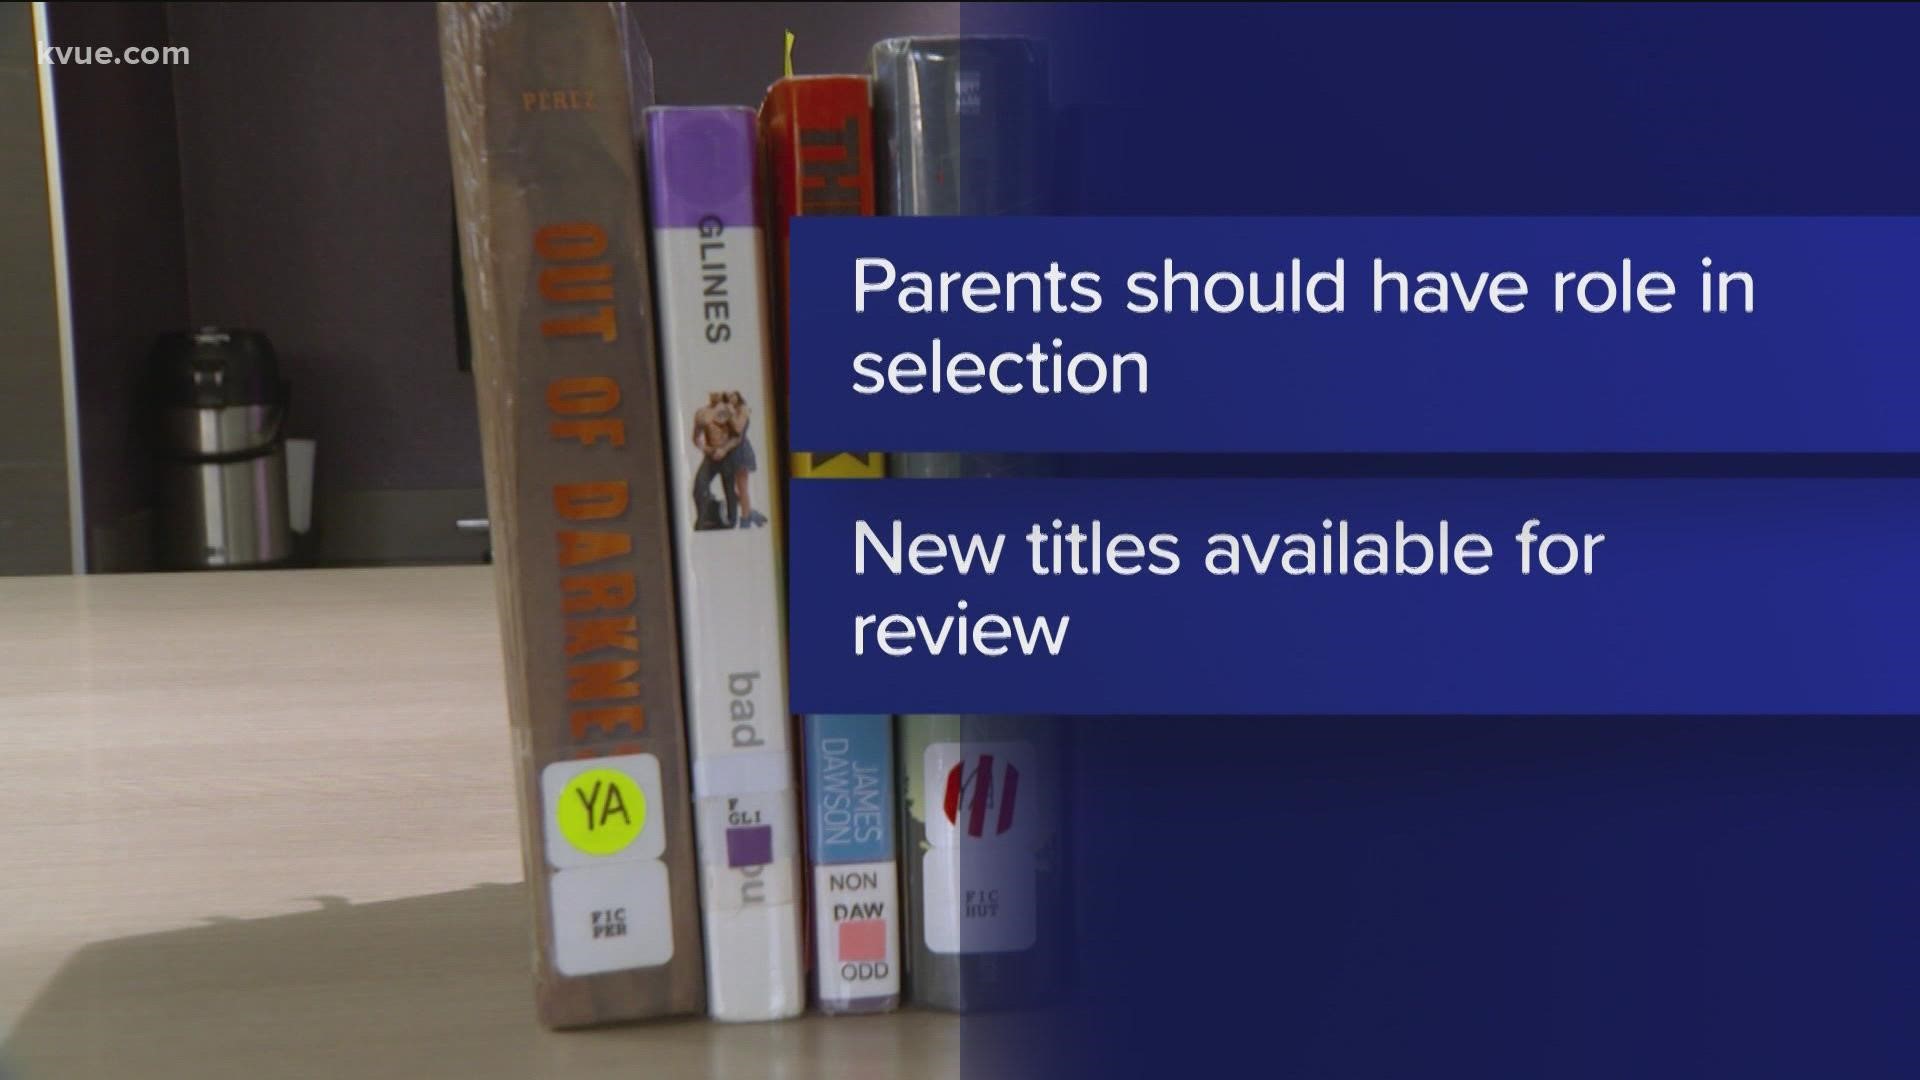 The Texas Education Agency released new guidelines for removing "obscene content" from school libraries.